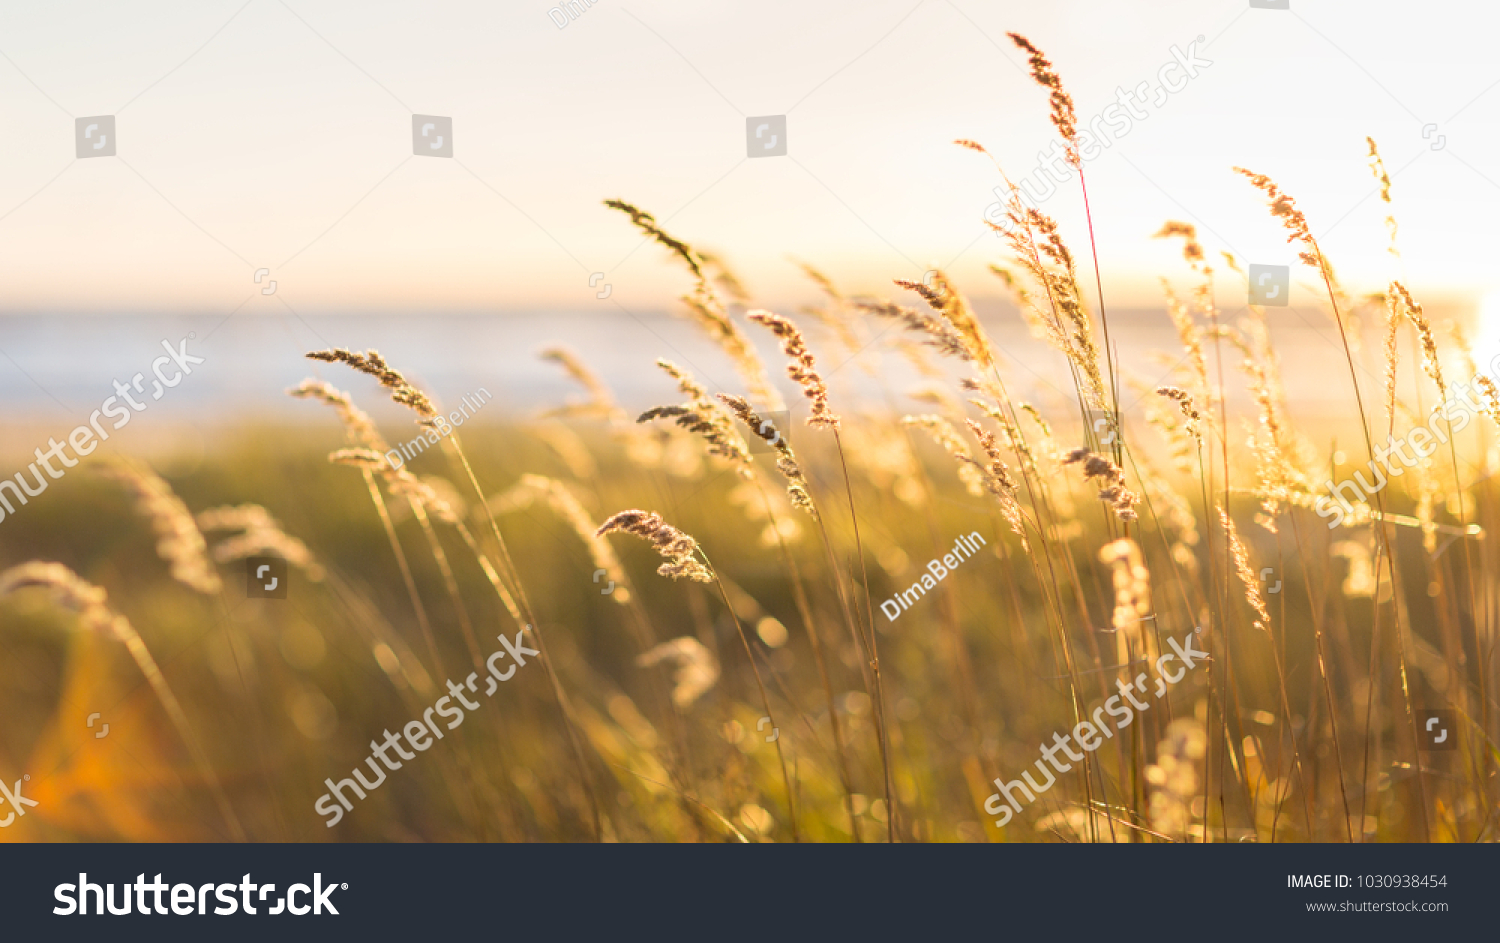 Selective soft focus of beach dry grass, reeds, stalks blowing in the wind at golden sunset light, horizontal, blurred sea on background, copy space/ Nature, summer, grass concept #1030938454